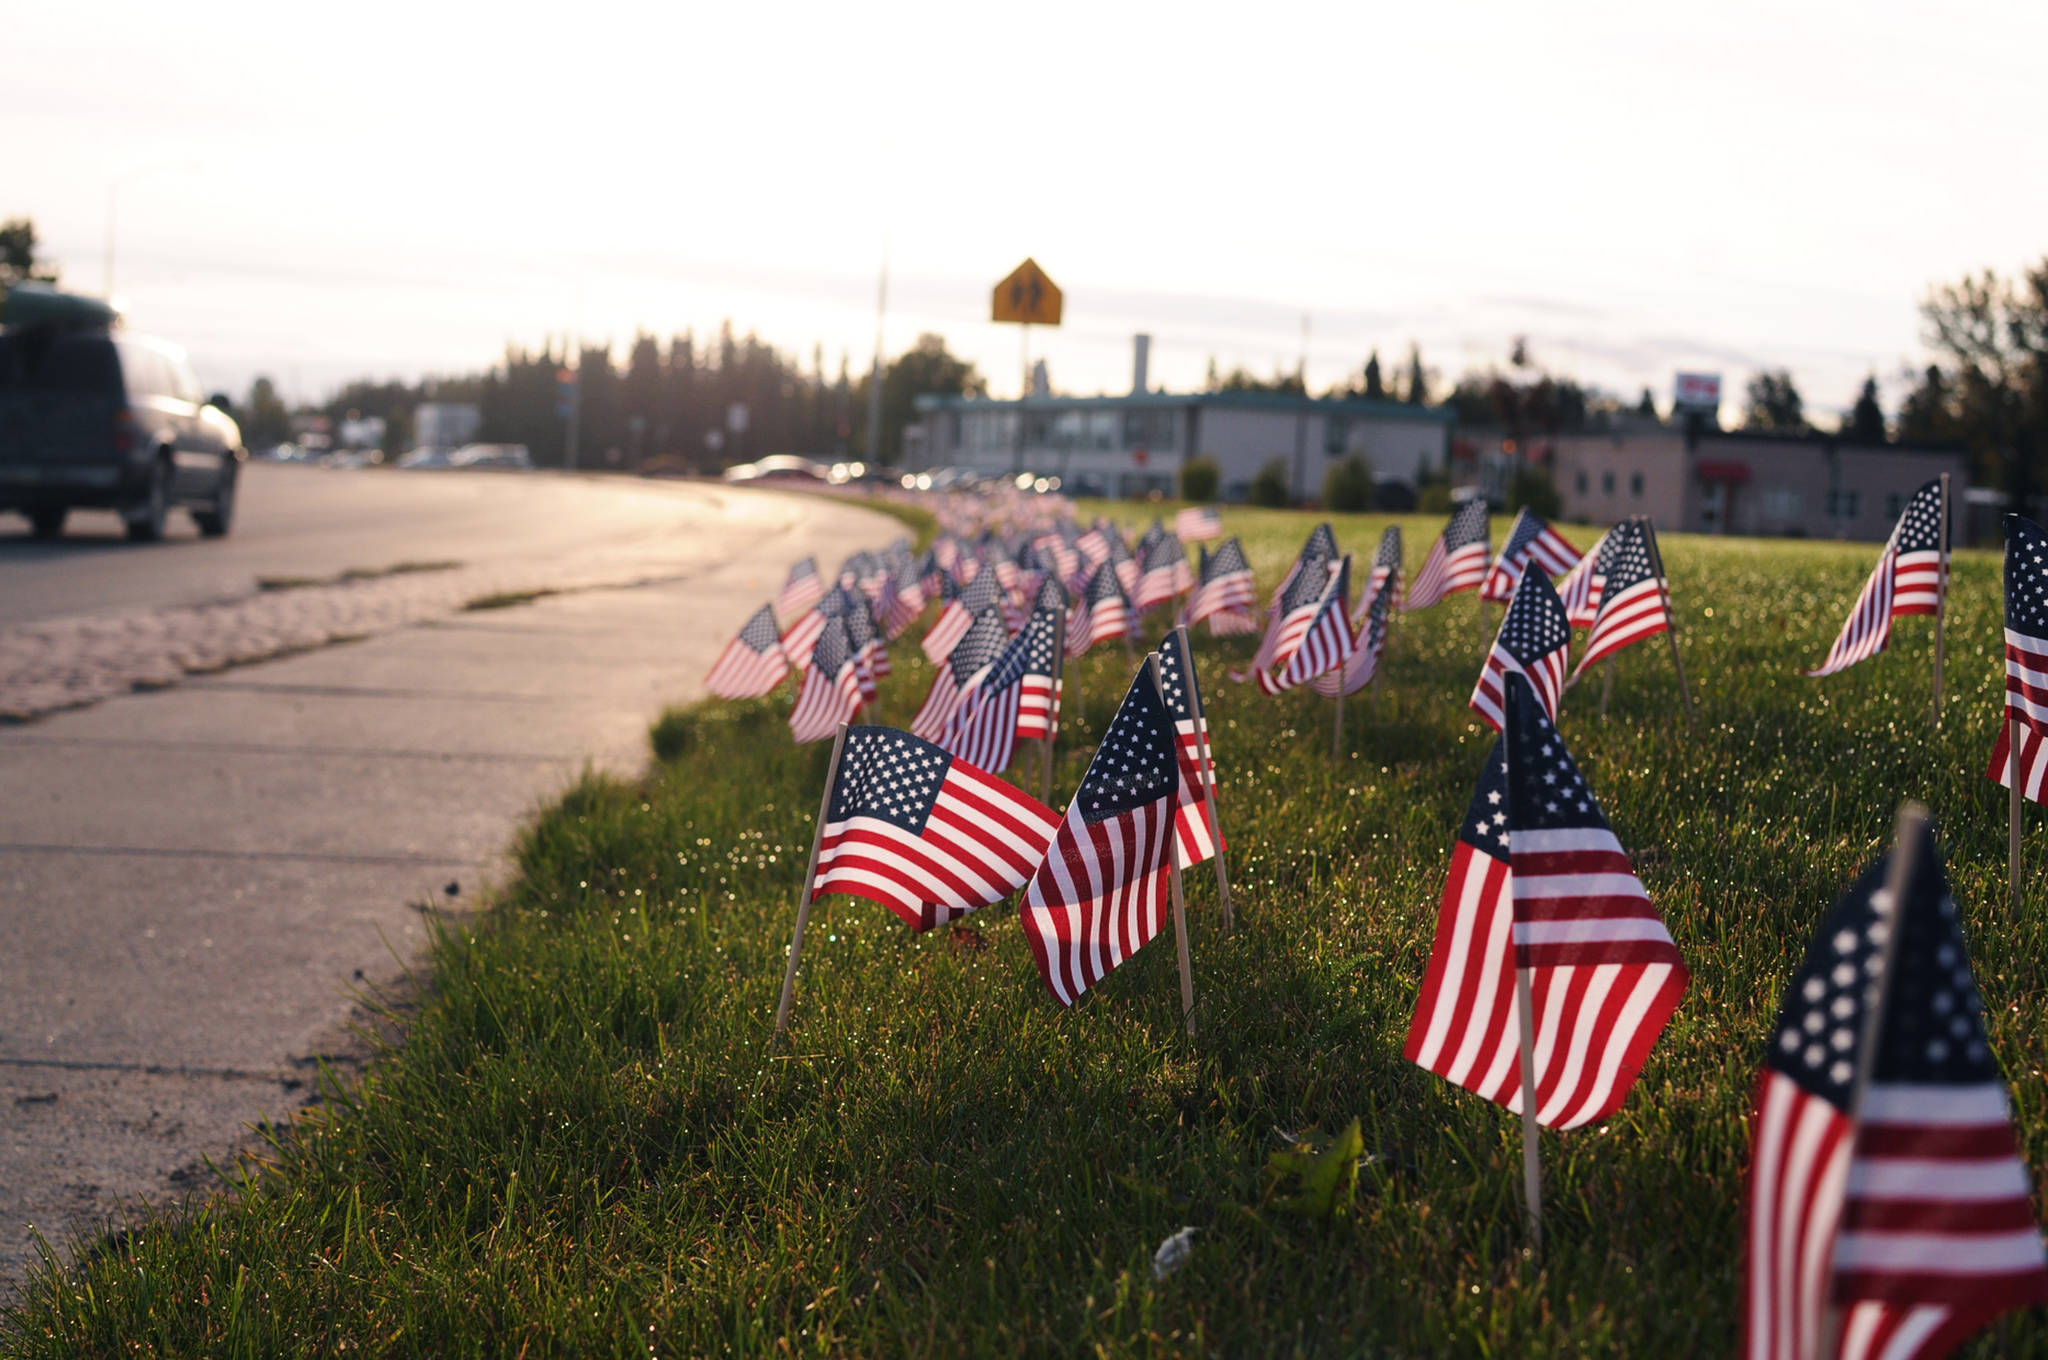 Not forgotten Small American flags dot the lawn alongside the Kenai Spur Highway on Monday in Kenai. The American Legion post in Kenai placed 2,996 flags on the greenway between Frontage Road and the highway, one for each person killed in coordinated terrorist attacks on the morning of Sept. 11, 2001. The display added to the Kenai Fire Department’s display of 343 flags on the corner of Willow and Main streets in honor of the firefighters killed in the line of duty trying to rescue people from the burning World Trade Center towers. (Photo by Elizabeth Earl/Peninsula Clarion)